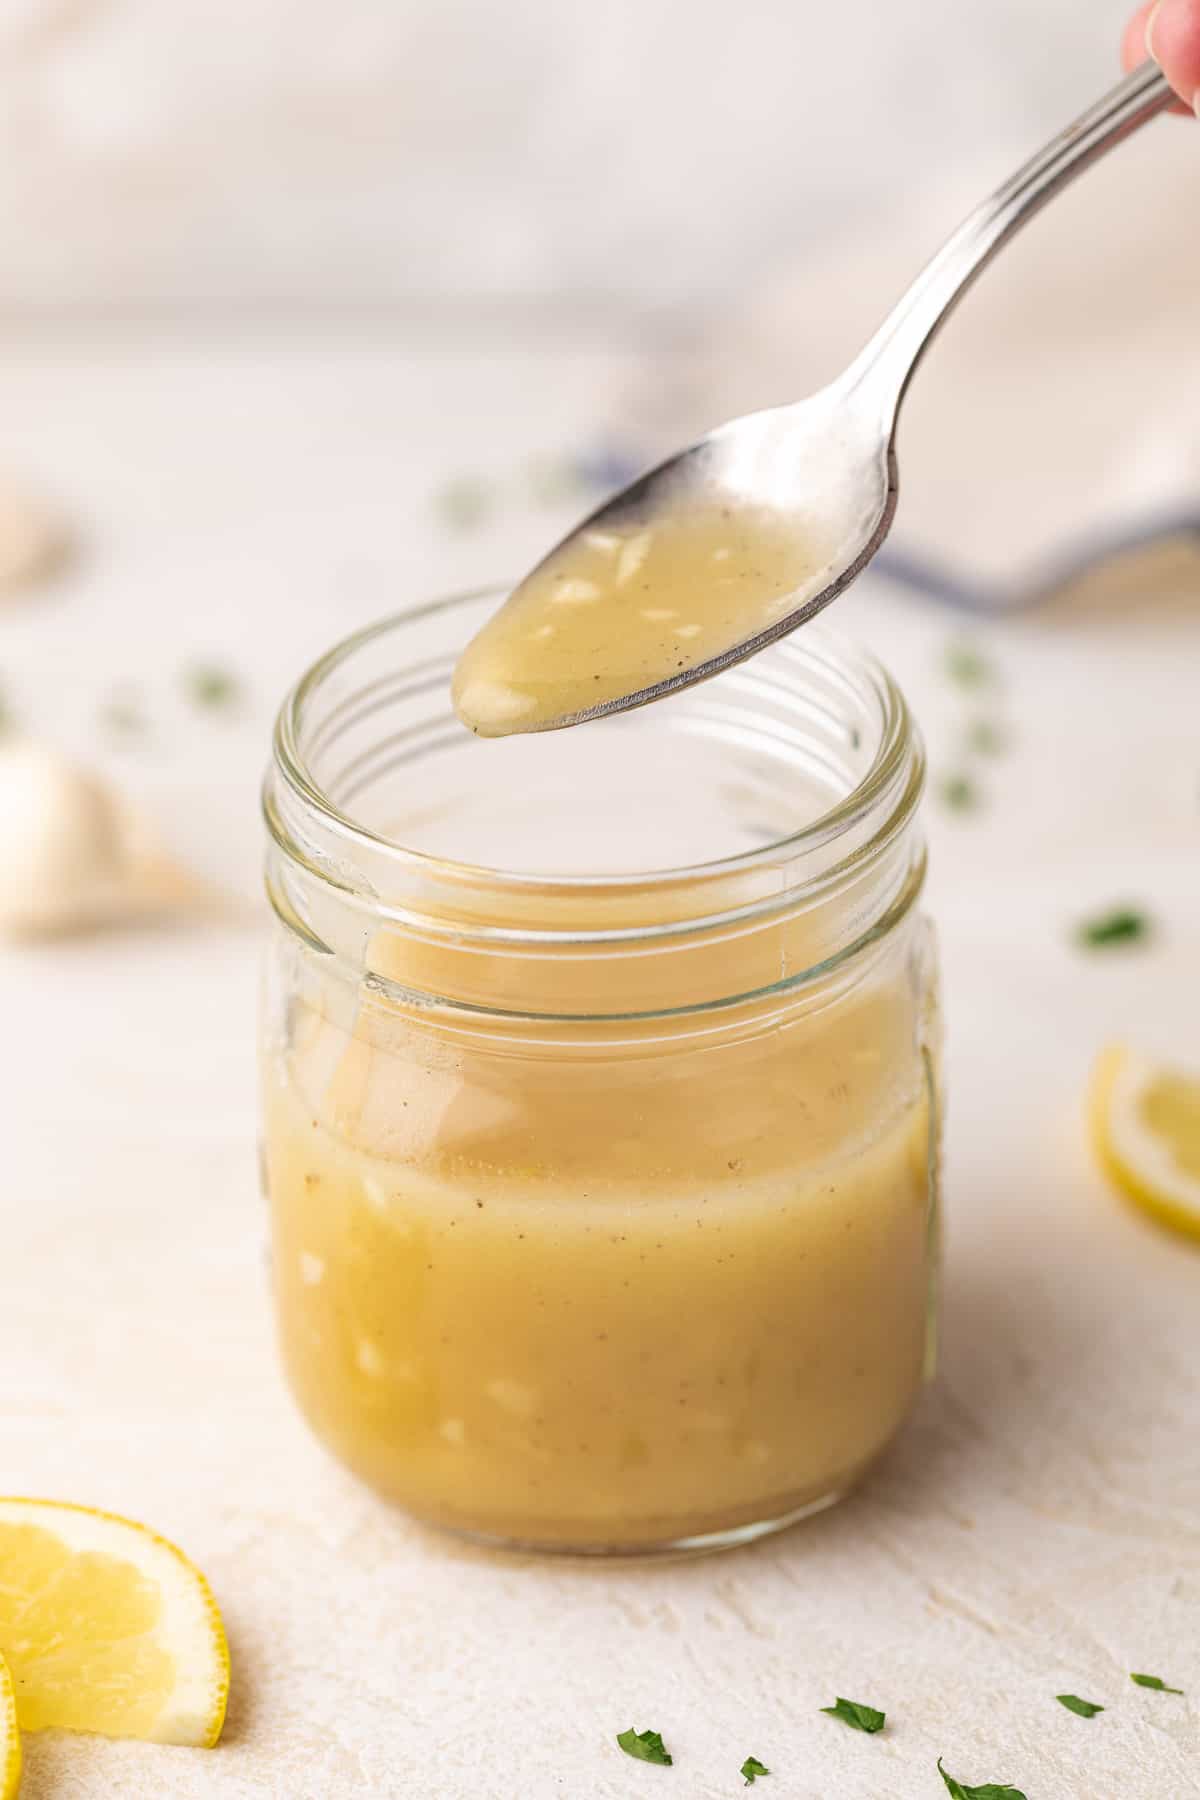 Spoon of salad dressing above a jar.